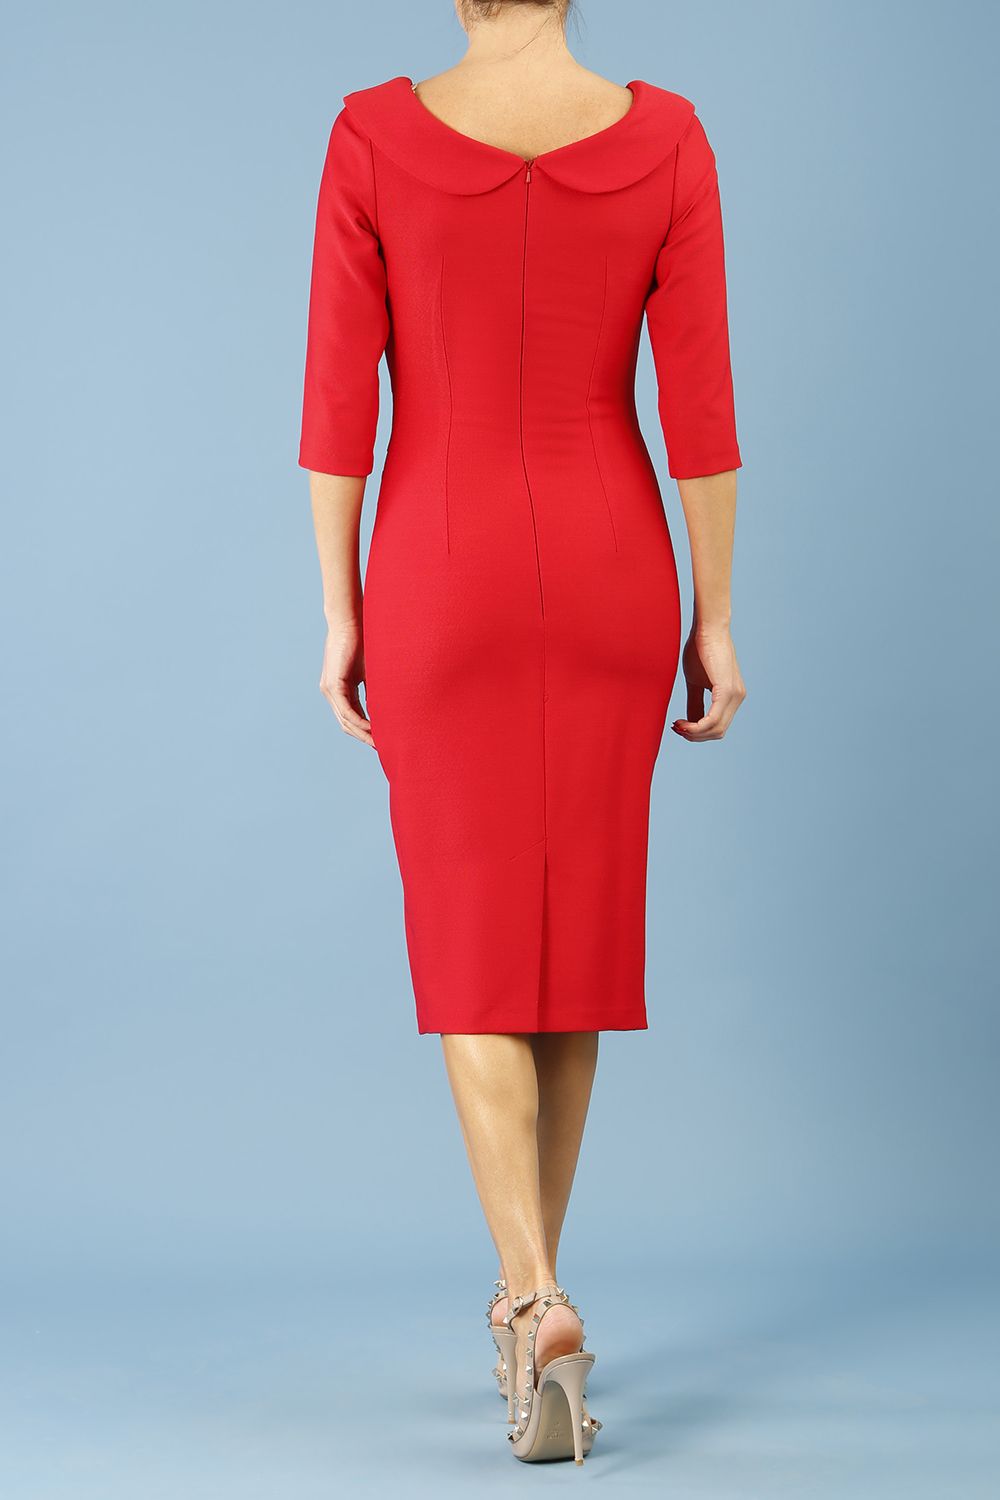 model is wearing diva catwalk seed axford pencil sleeved dress with rounded folded collar in salsa red back